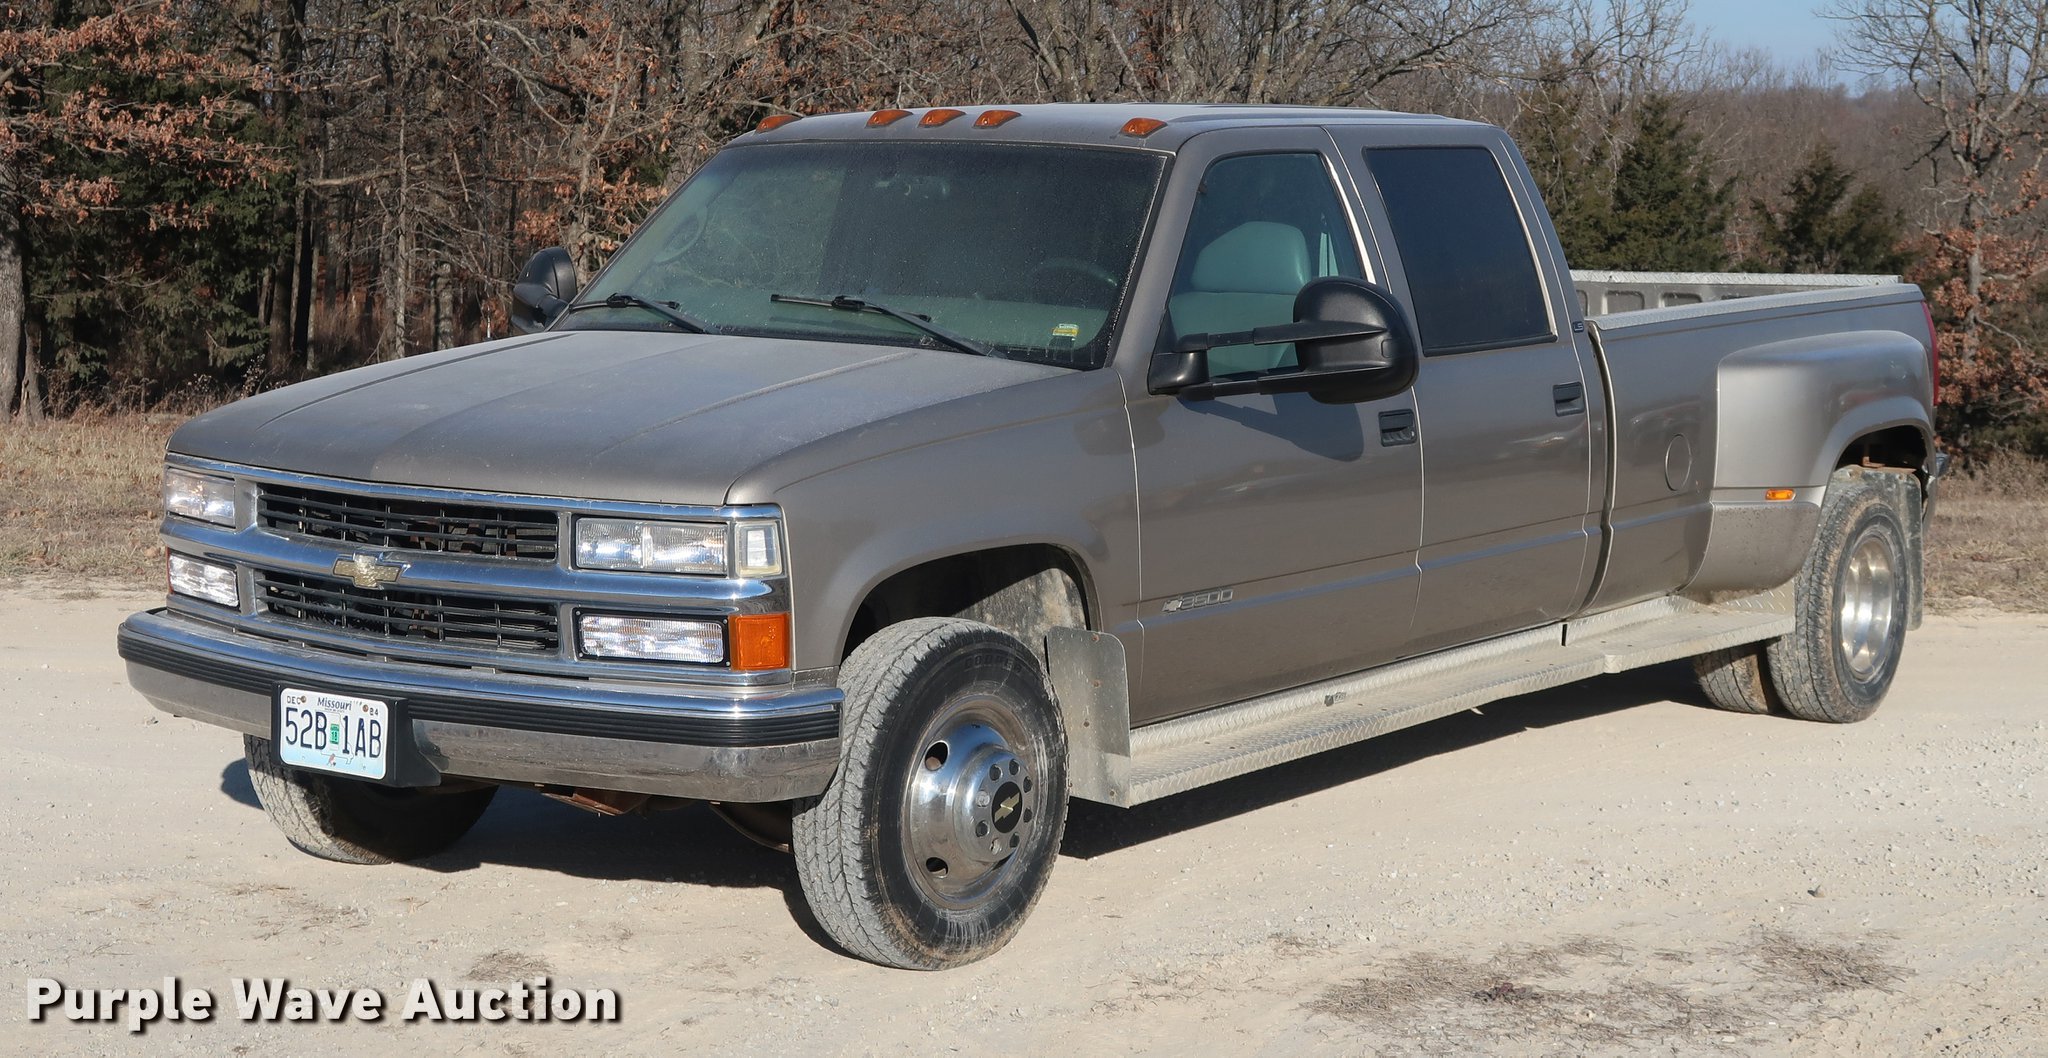 1999 Chevrolet 3500 Crew Cab pickup truck in Cross Timbers, MO | Item  DD9551 sold | Purple Wave